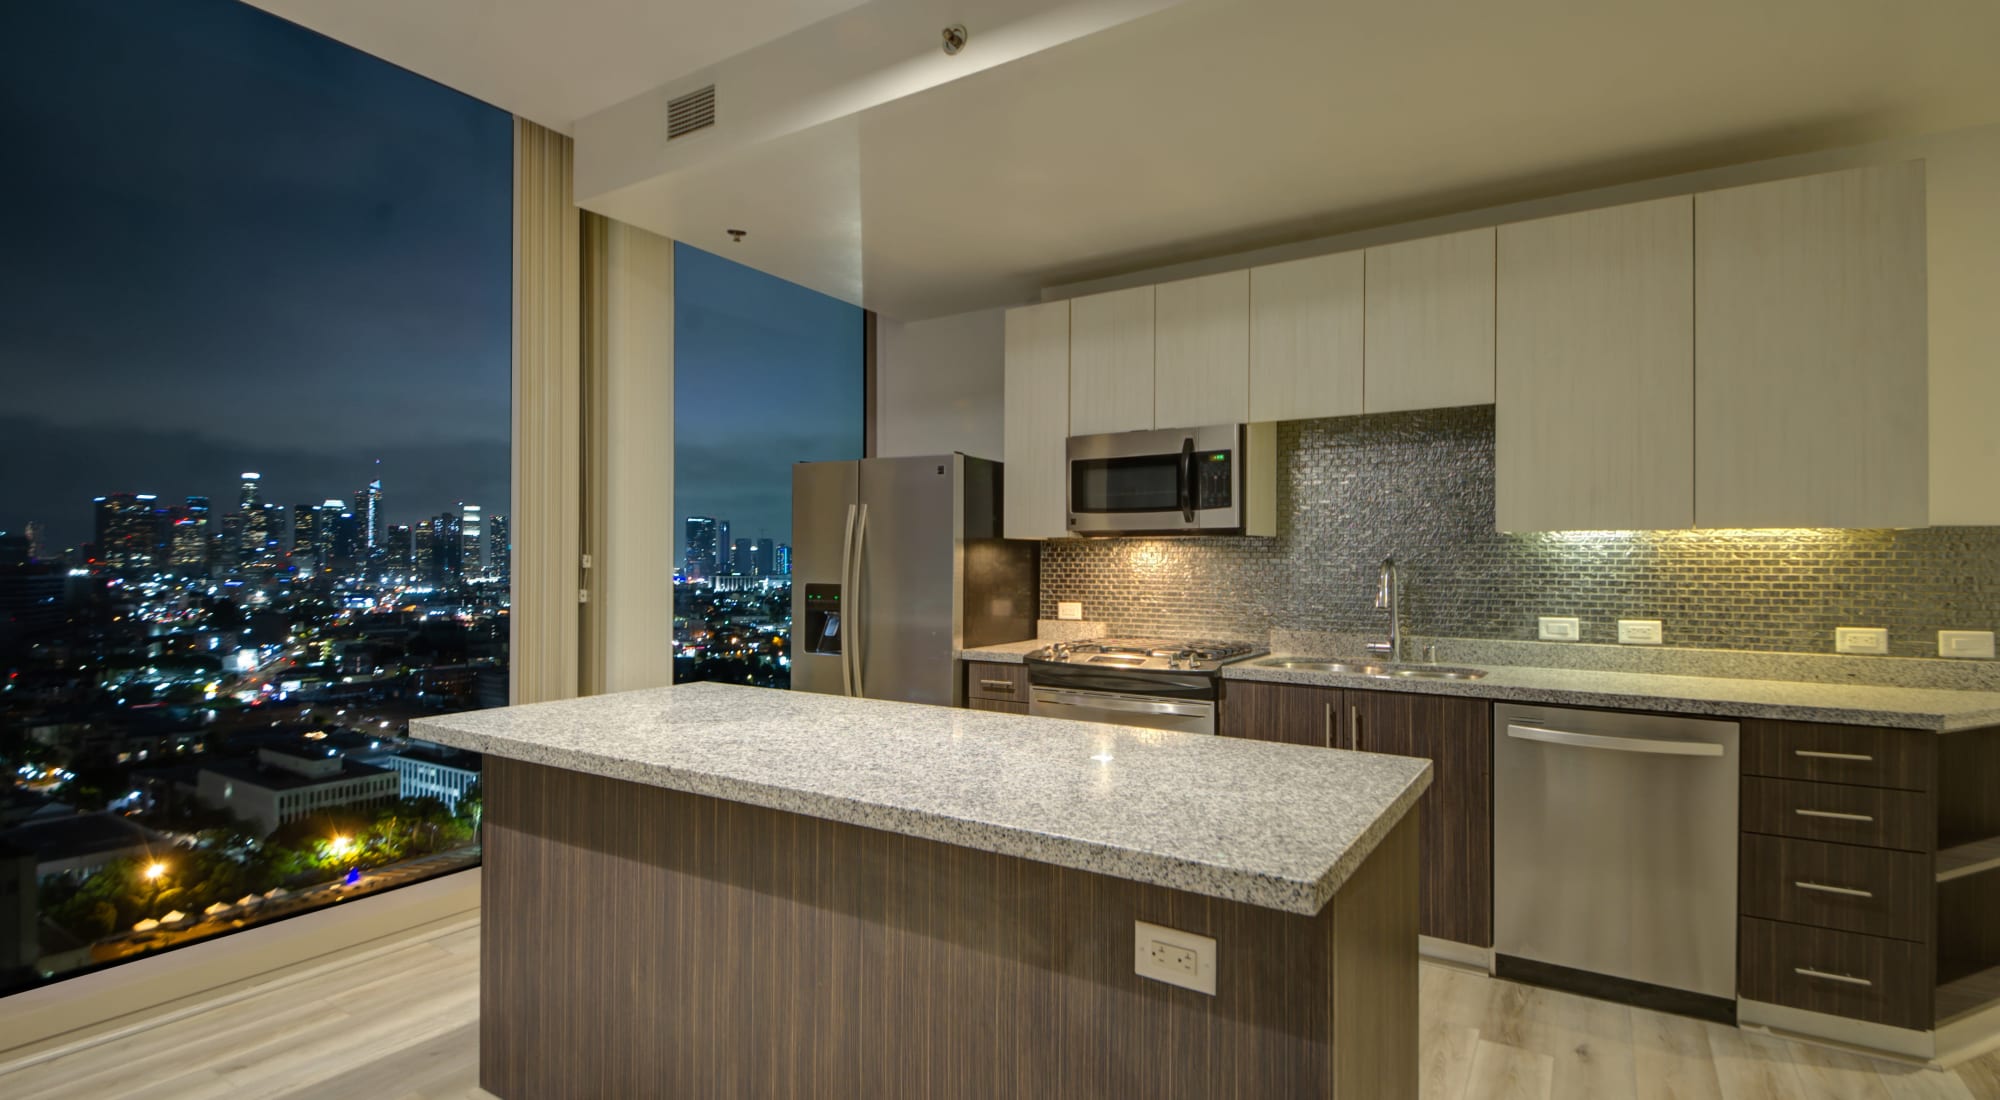 Kitchen with city view at Apartments in Los Angeles, California